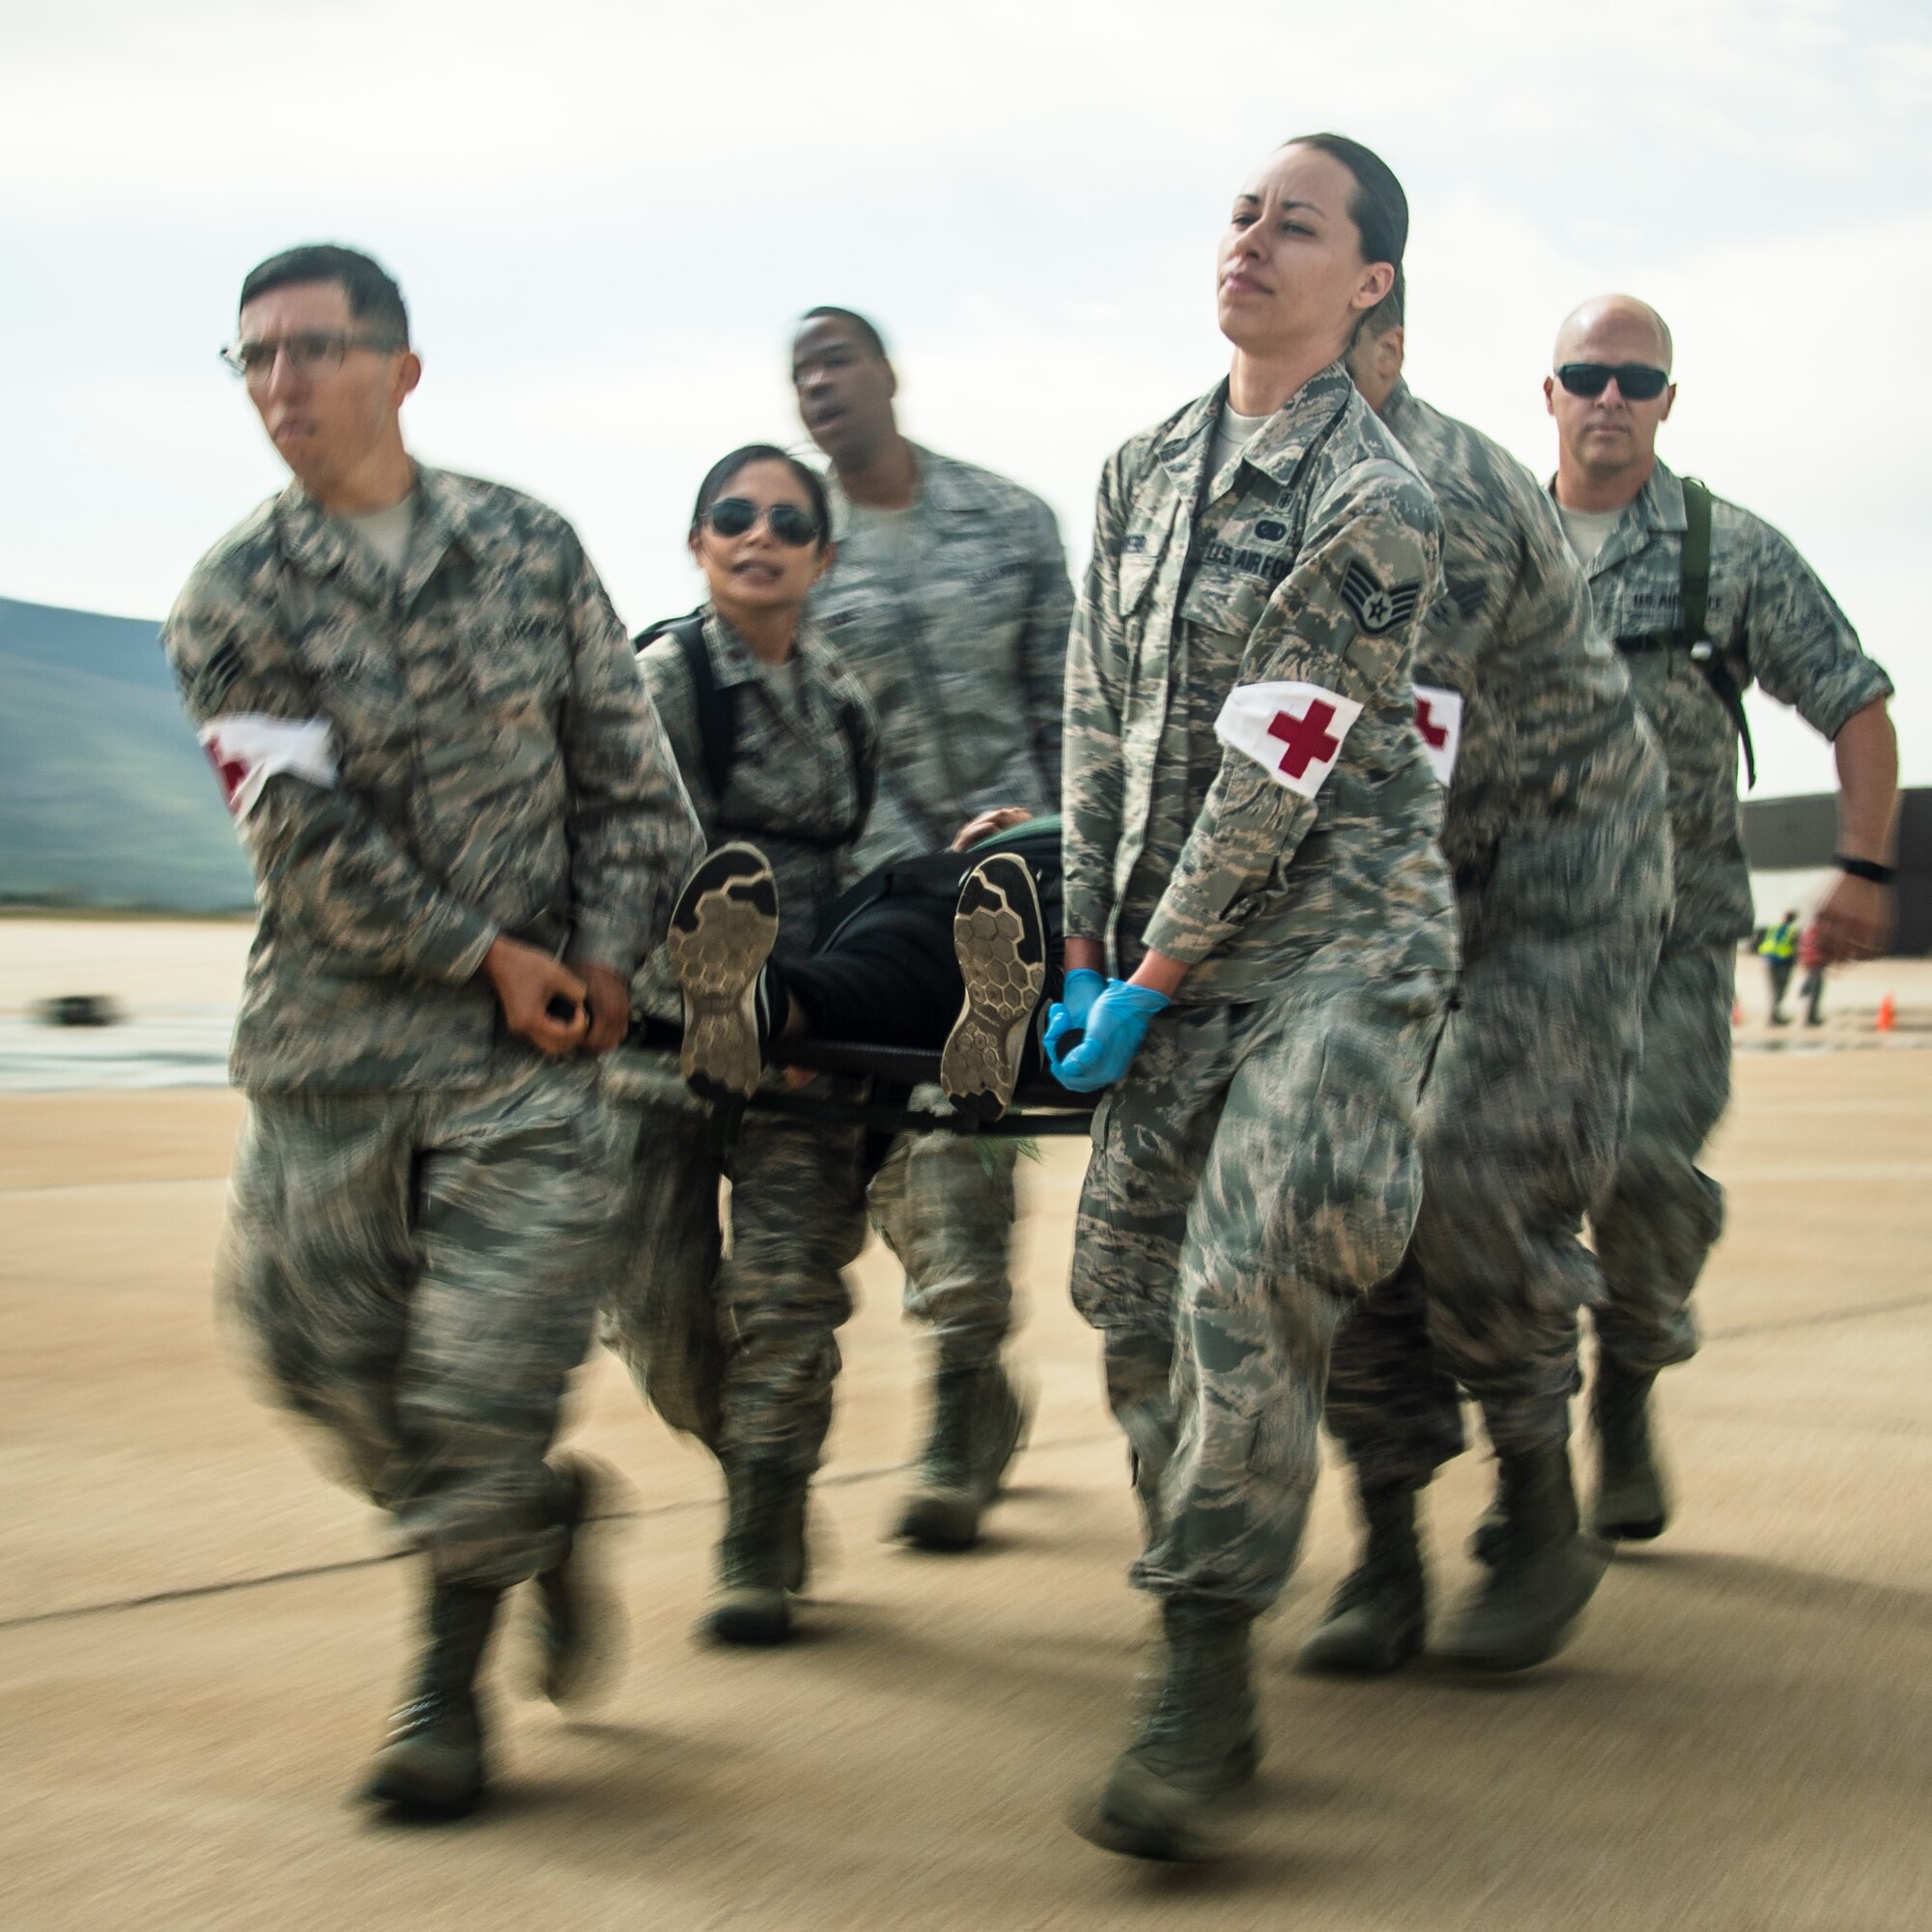 Airmen carry a simulated casualty during an major accident response exercise May 9, 2018, at Hill Air Force Base, Utah. Emergency response personnel from the base and surrounding communities participated in the exercise along with Airmen in prepartion for the Warriors Over the Wasatch Air and Space Show June 23-24. (U.S. Air Force photo by R. Nial Bradshaw)